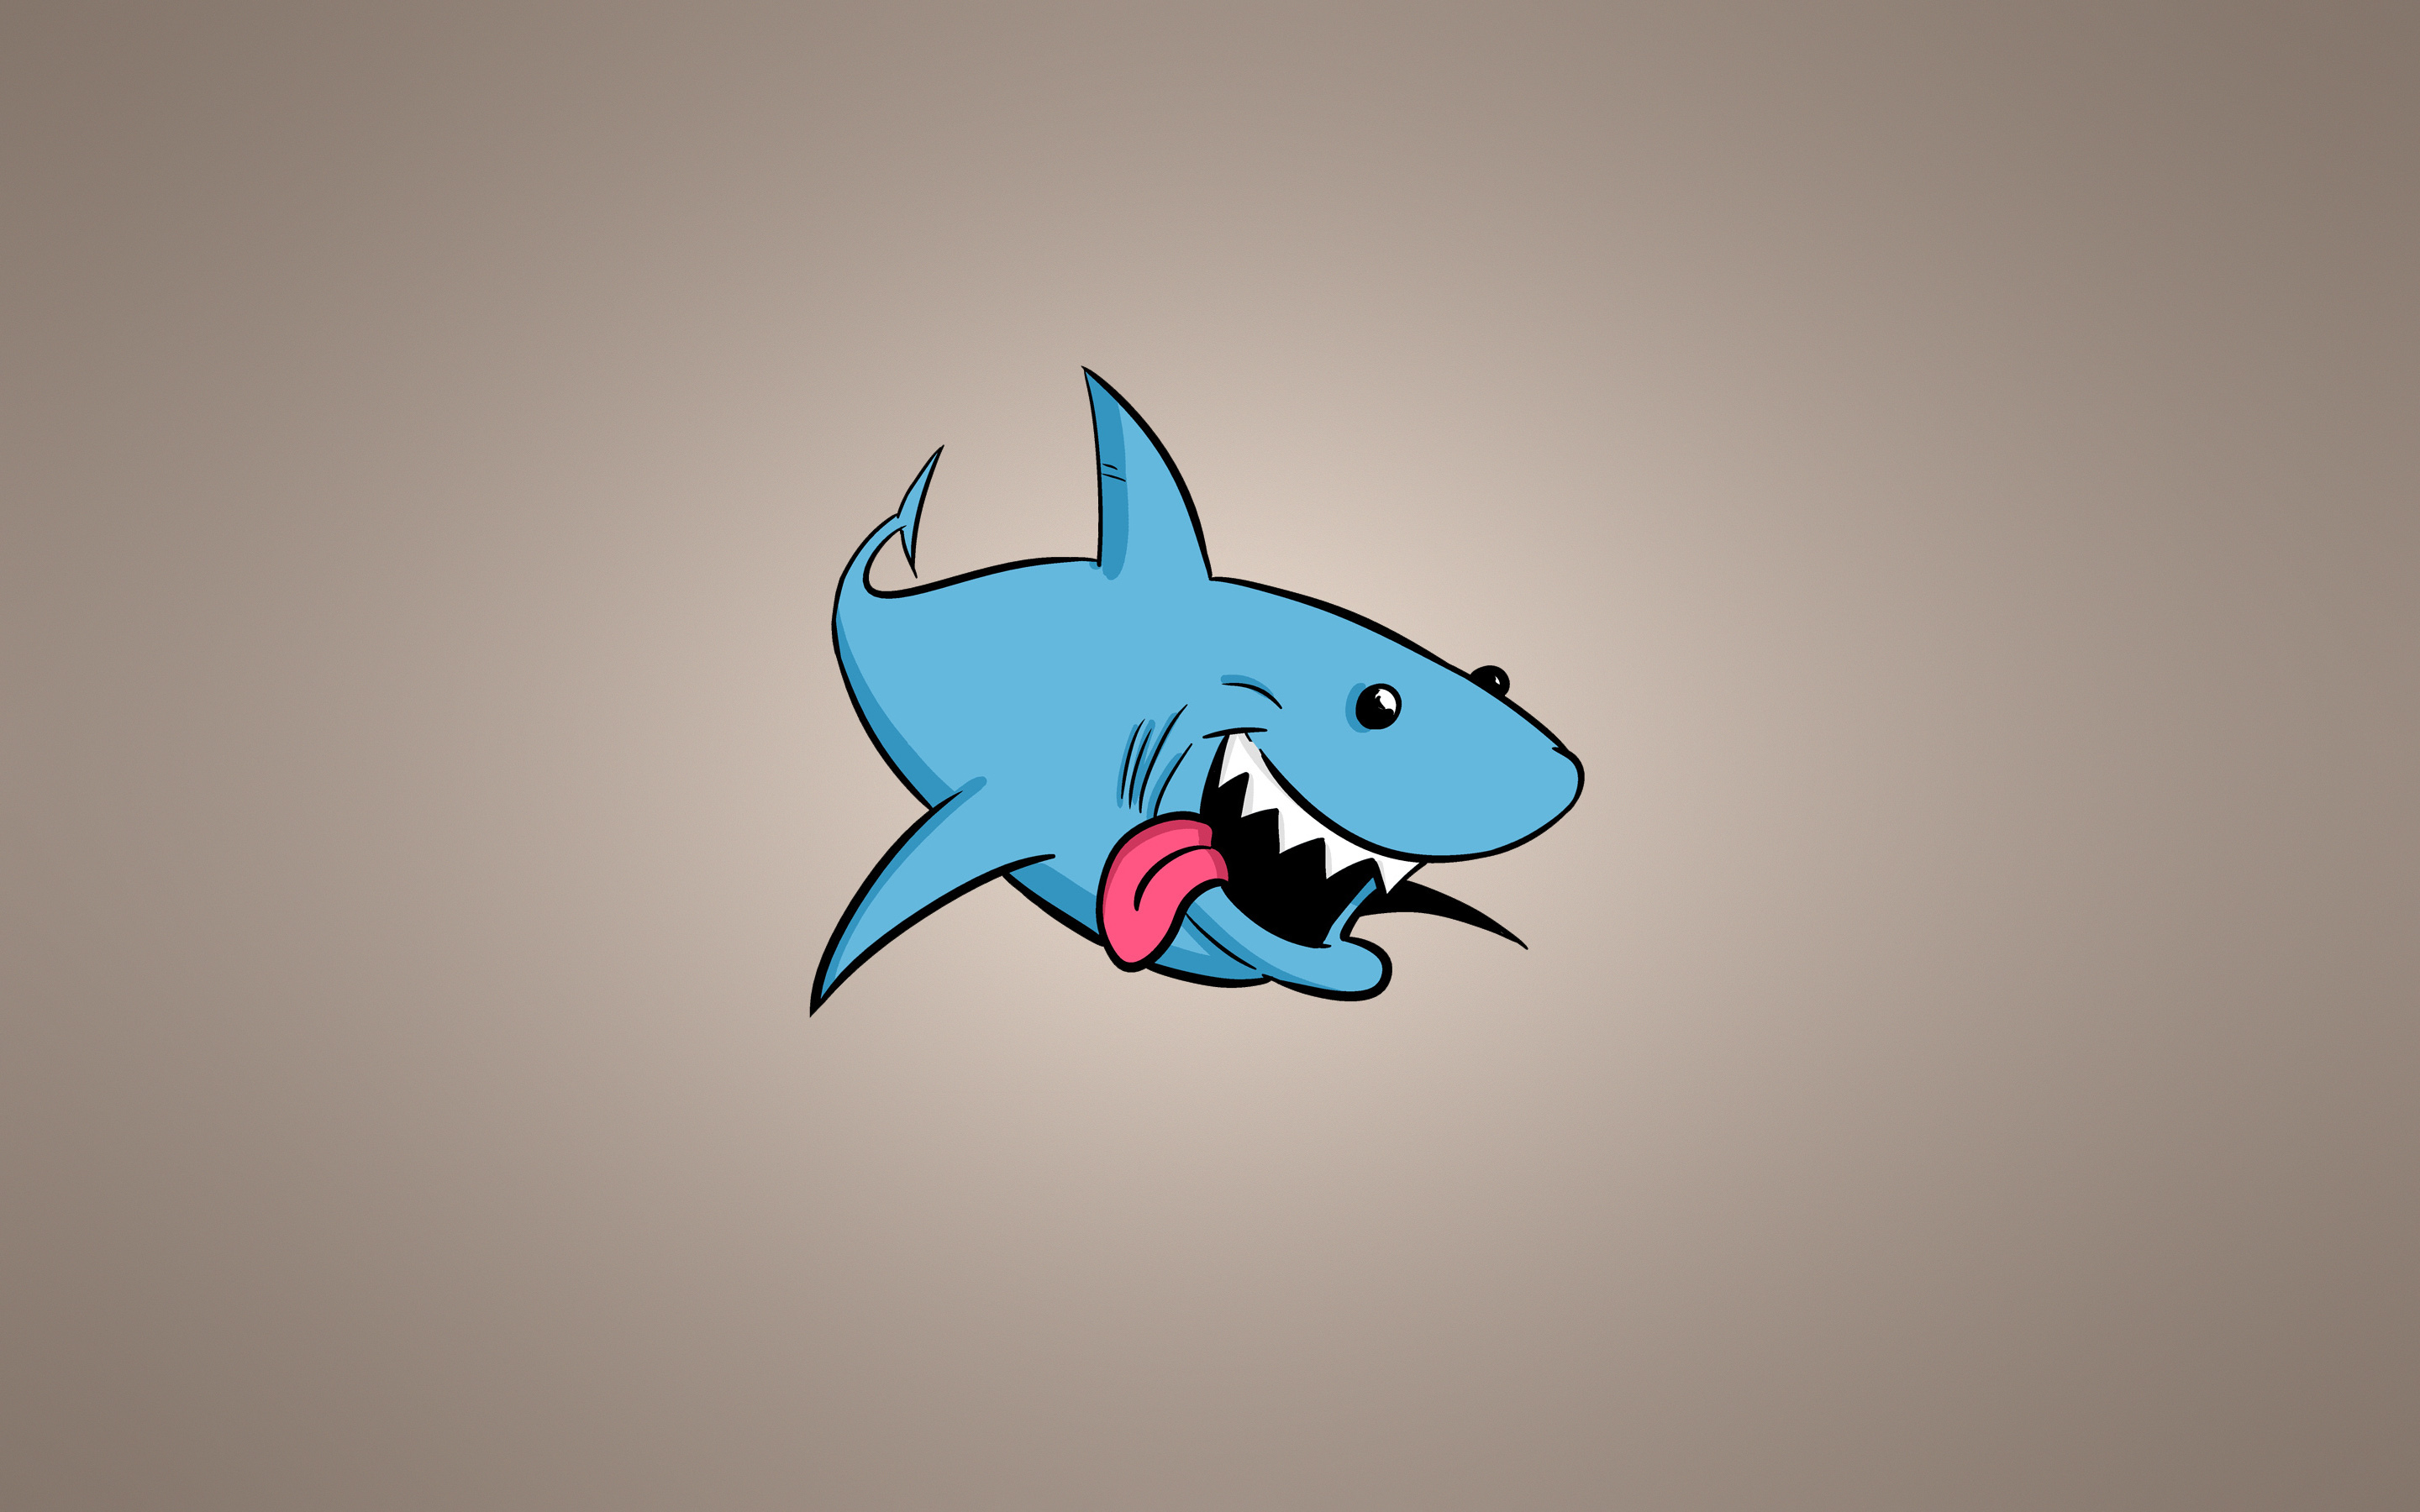 background, vector, art, protruding tongue, tongue stuck out, shark 2160p